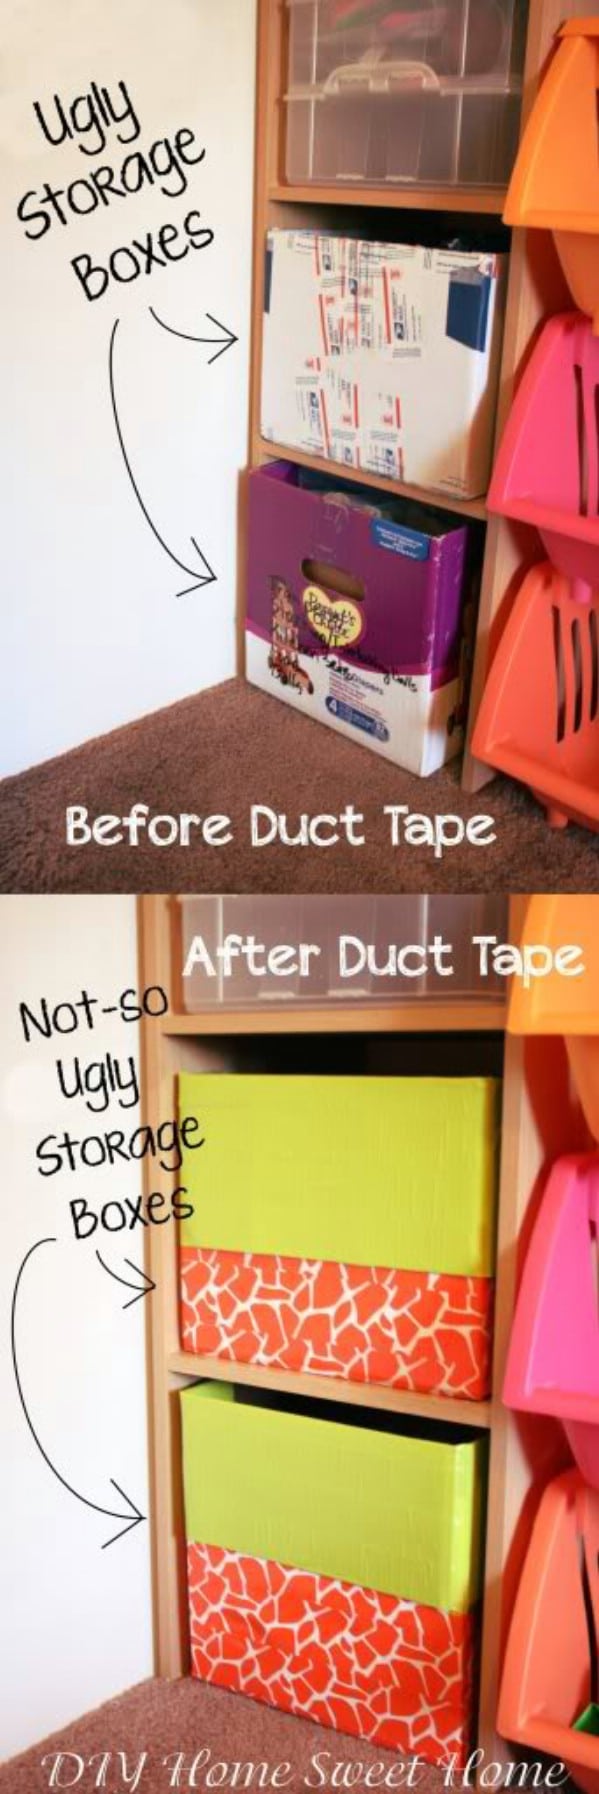 Use Colorful Duct Tape - 49 Brilliant Garage Organization Tips, Ideas and DIY Projects